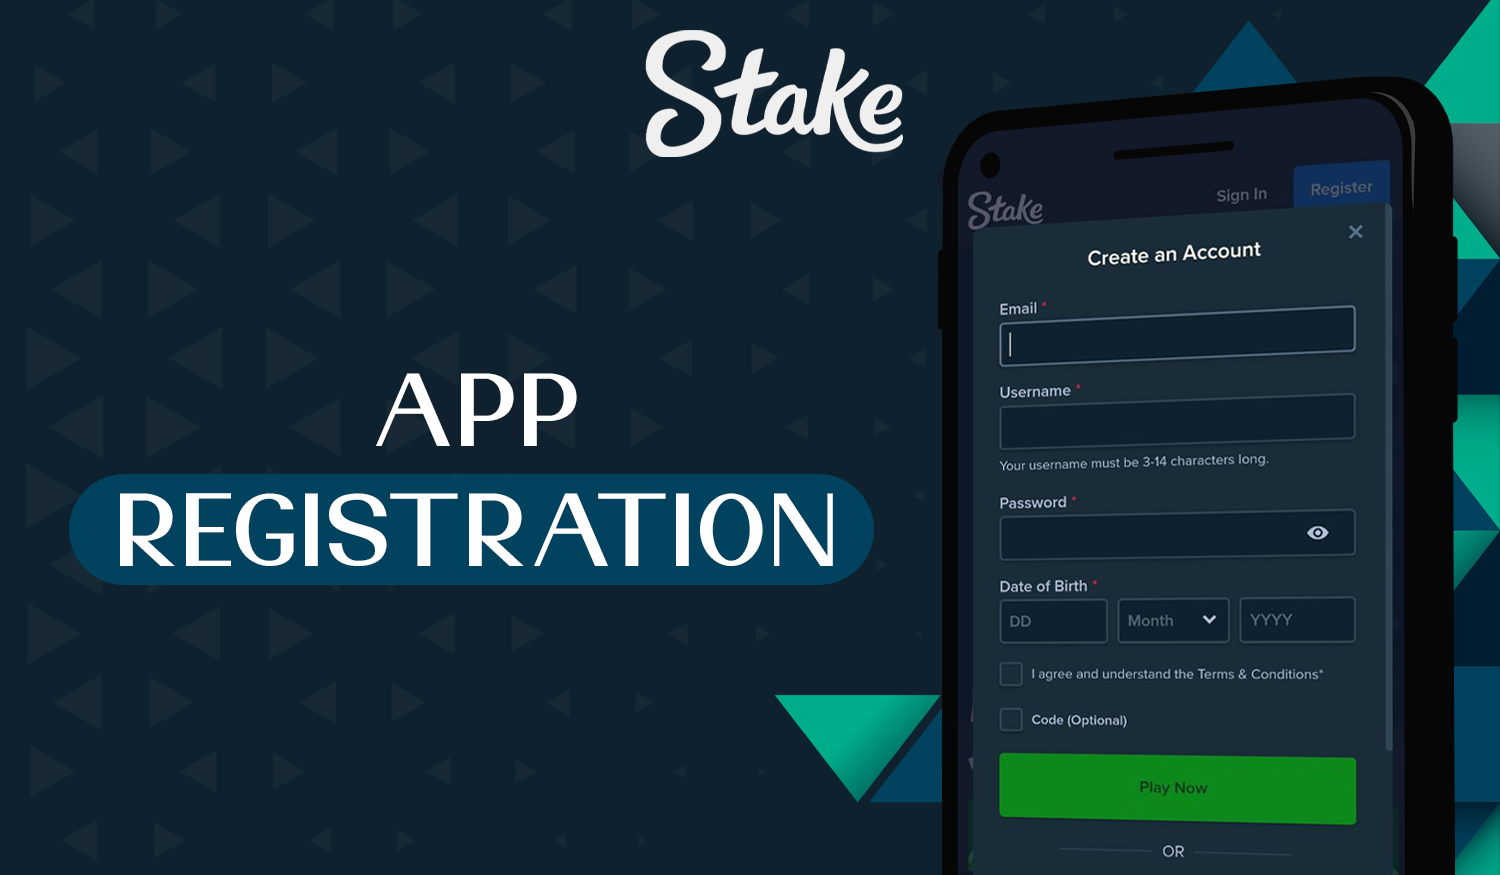 How to create a new account using the Stake mobile app 